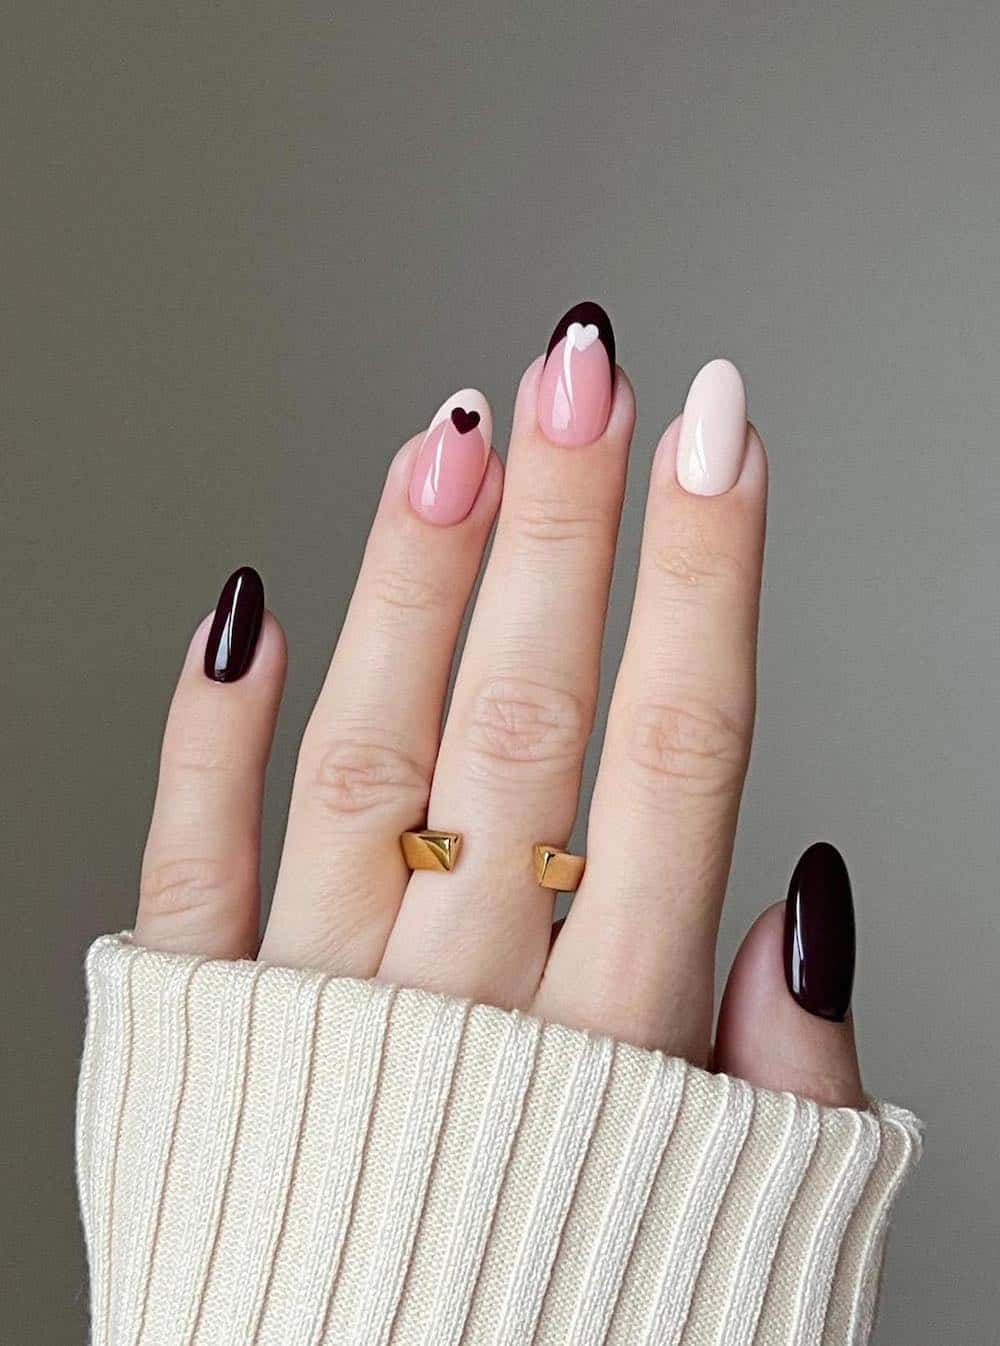 A hand with short round nails painted in cream, black, and nude pink accent nails with contrasting French tips and hearts